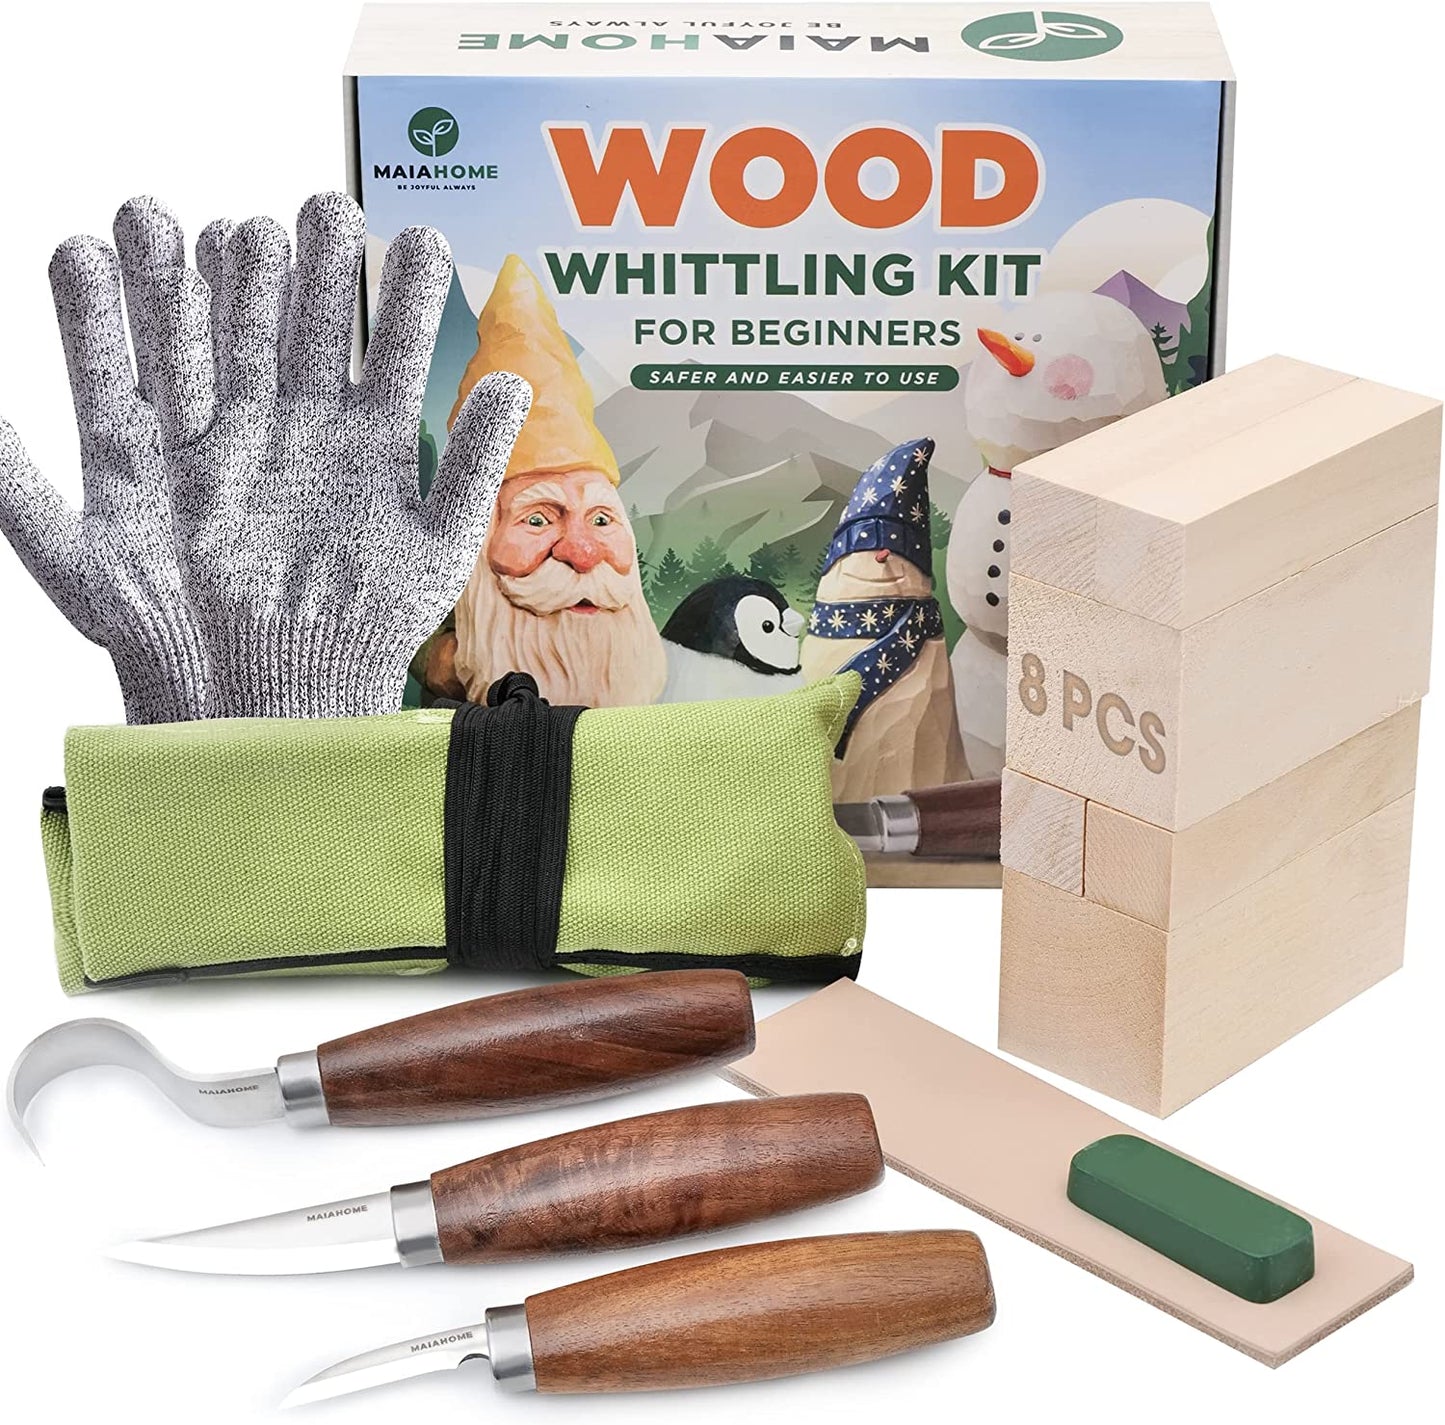 Whittling Kit for Beginners Includes 8-Basswood Wood Carving Blocks Set, 3Pcs Whittling Knife - Wood Carving Kit with Tools and Carving Knifes for Adults, Beginners, Kids - Very Sharp, Easy to Carve